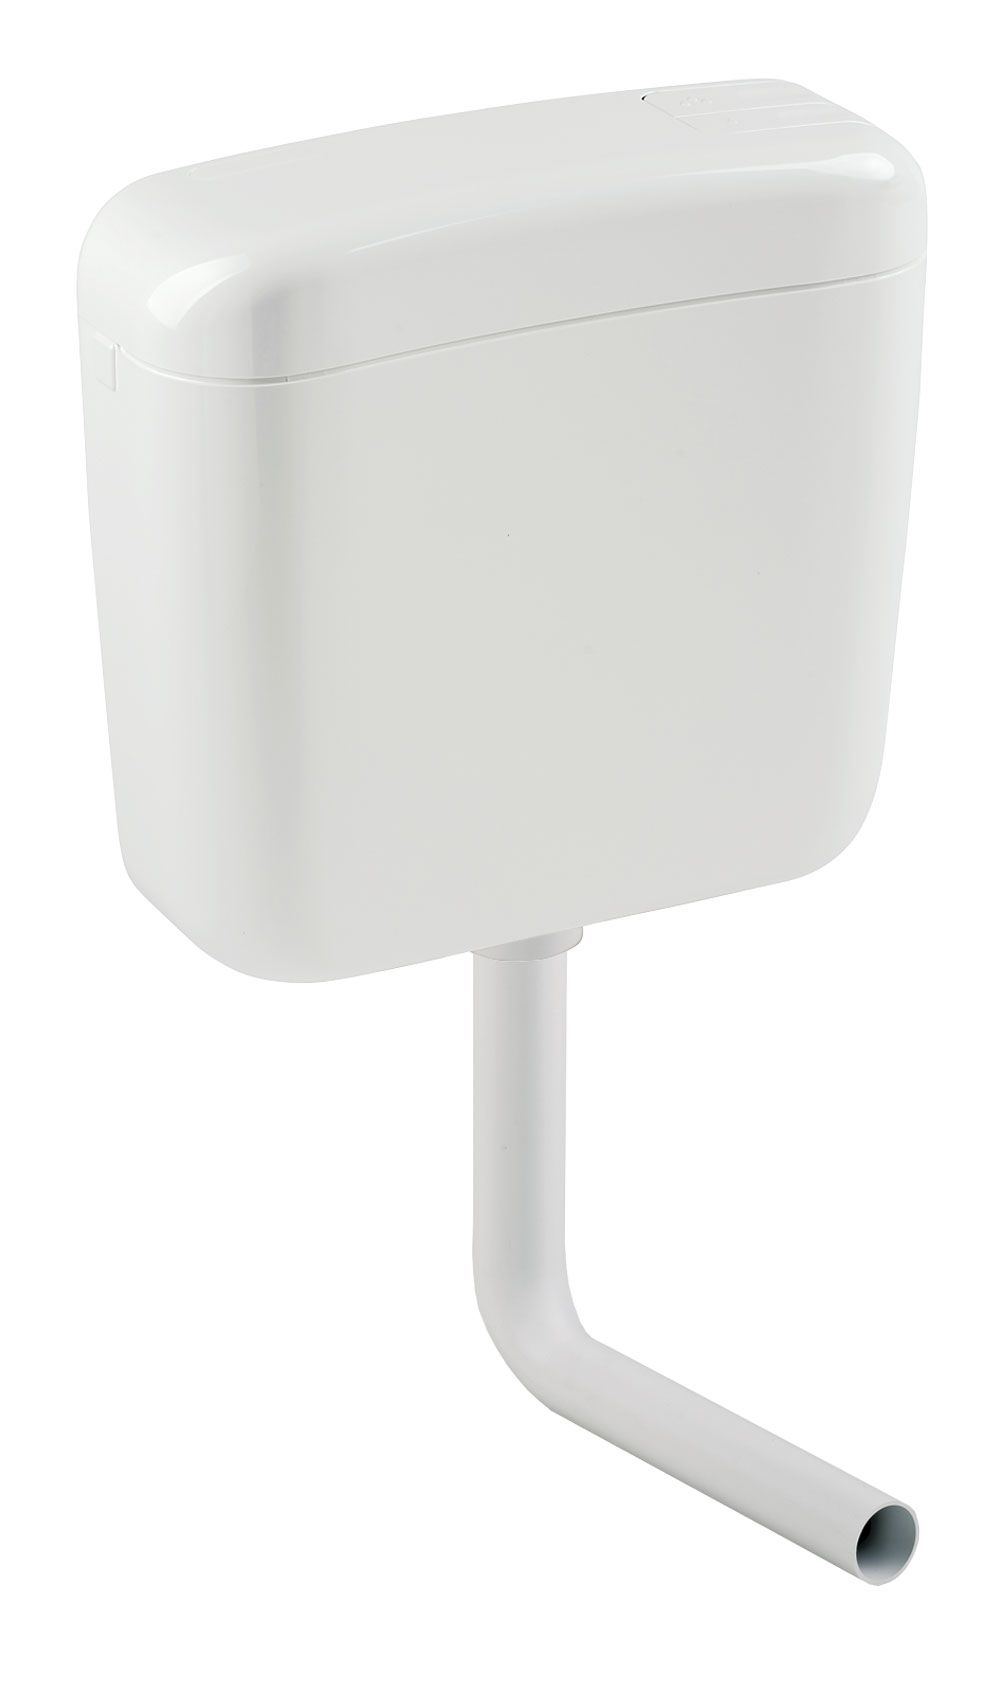 Exposed cistern VISION DUO, white